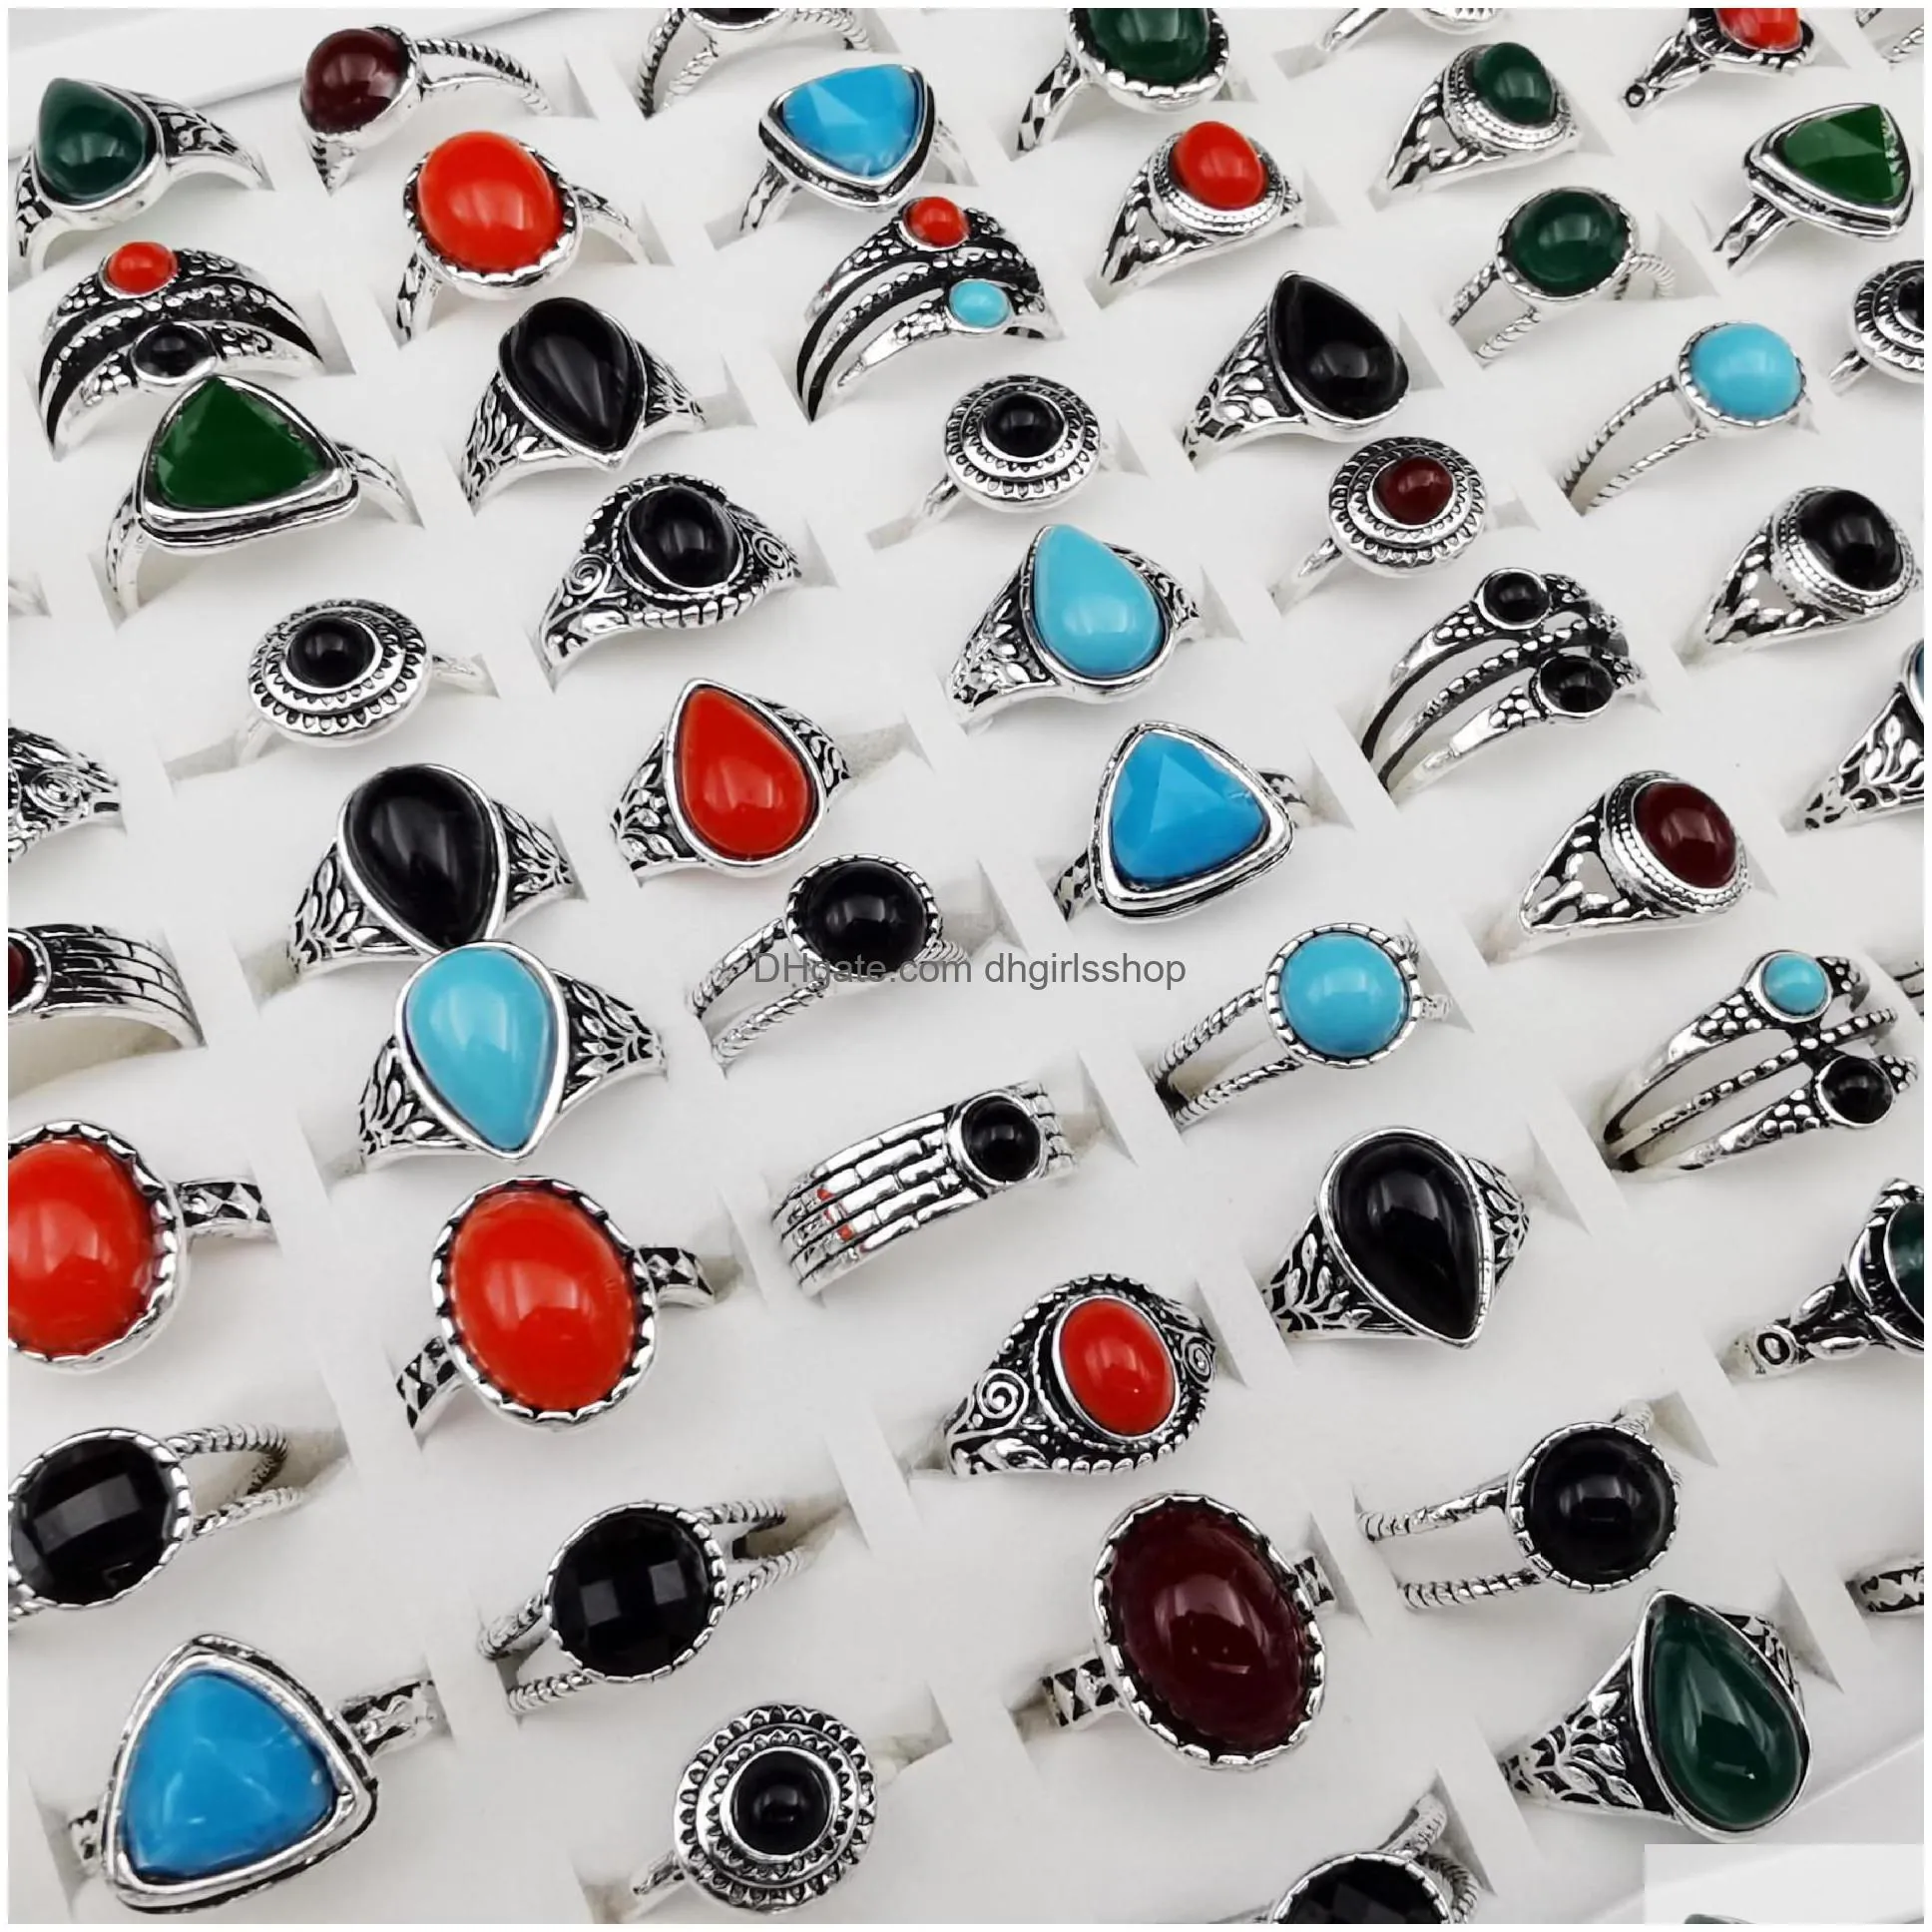 50pcs/lot antique carved gemstone rings classic sapphire ruby rings for women men bohemian luxury retro rings gift party 001